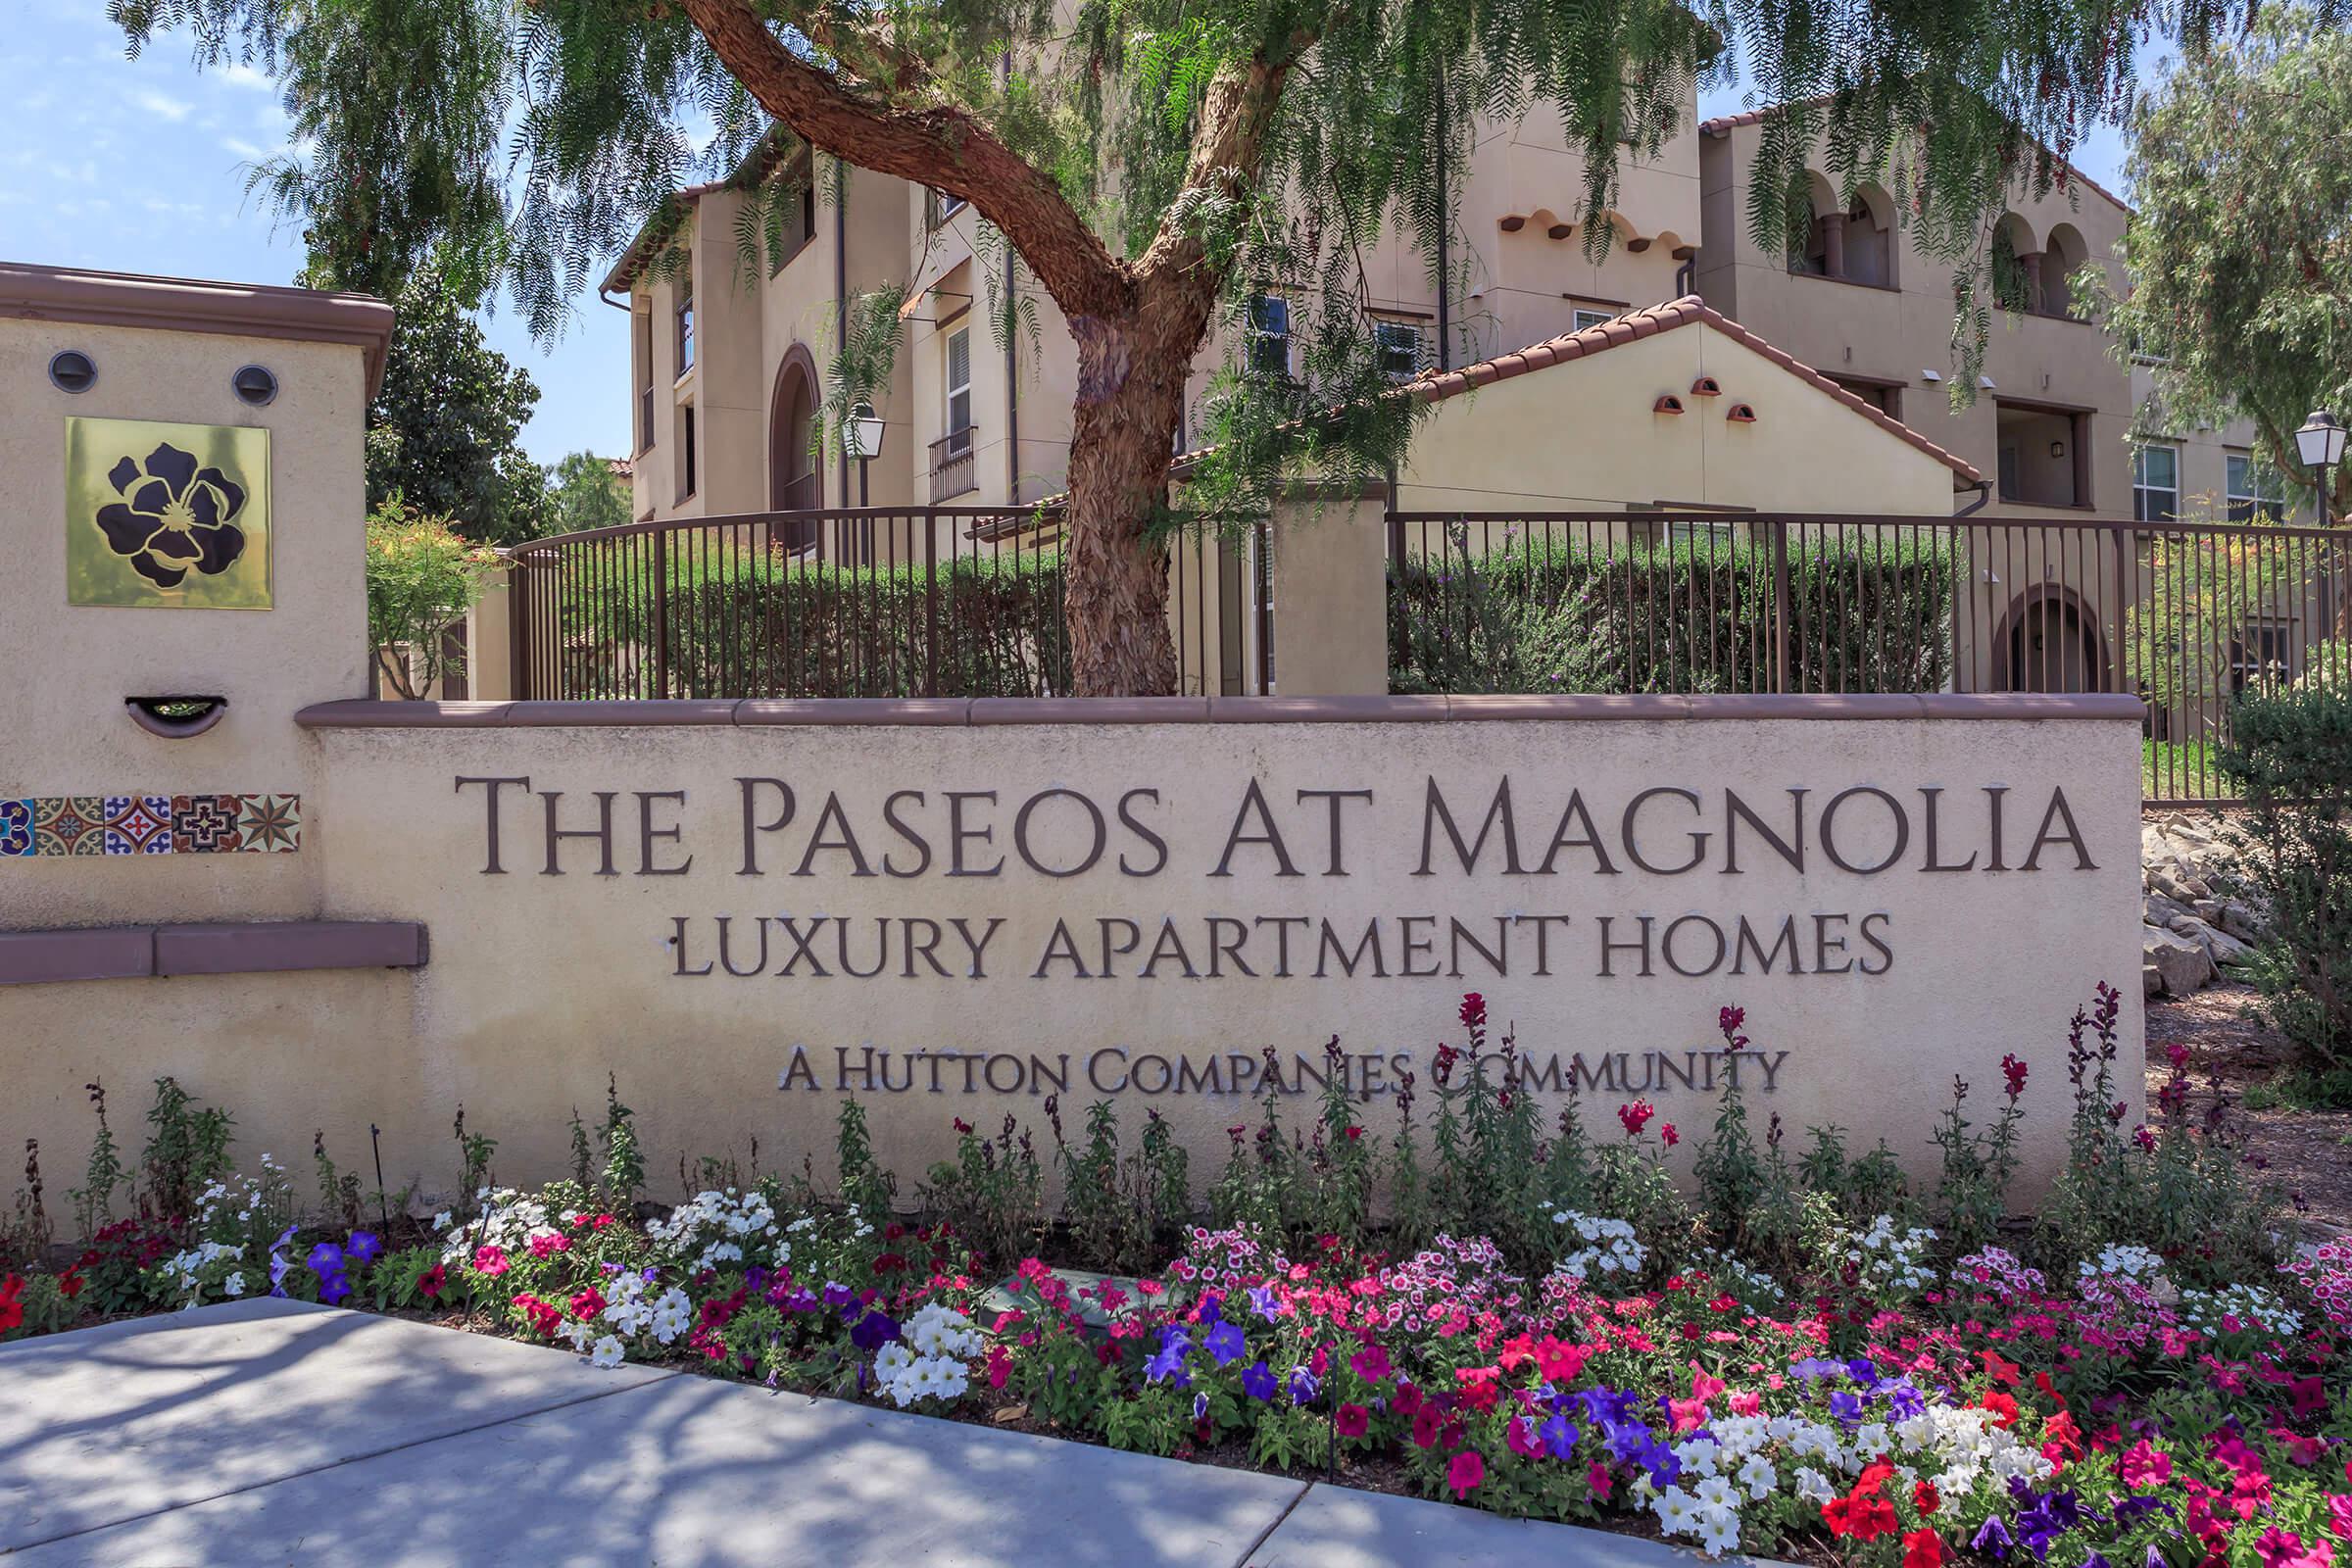 The Paseos at Magnolia Luxury Apartment Homes monument sign